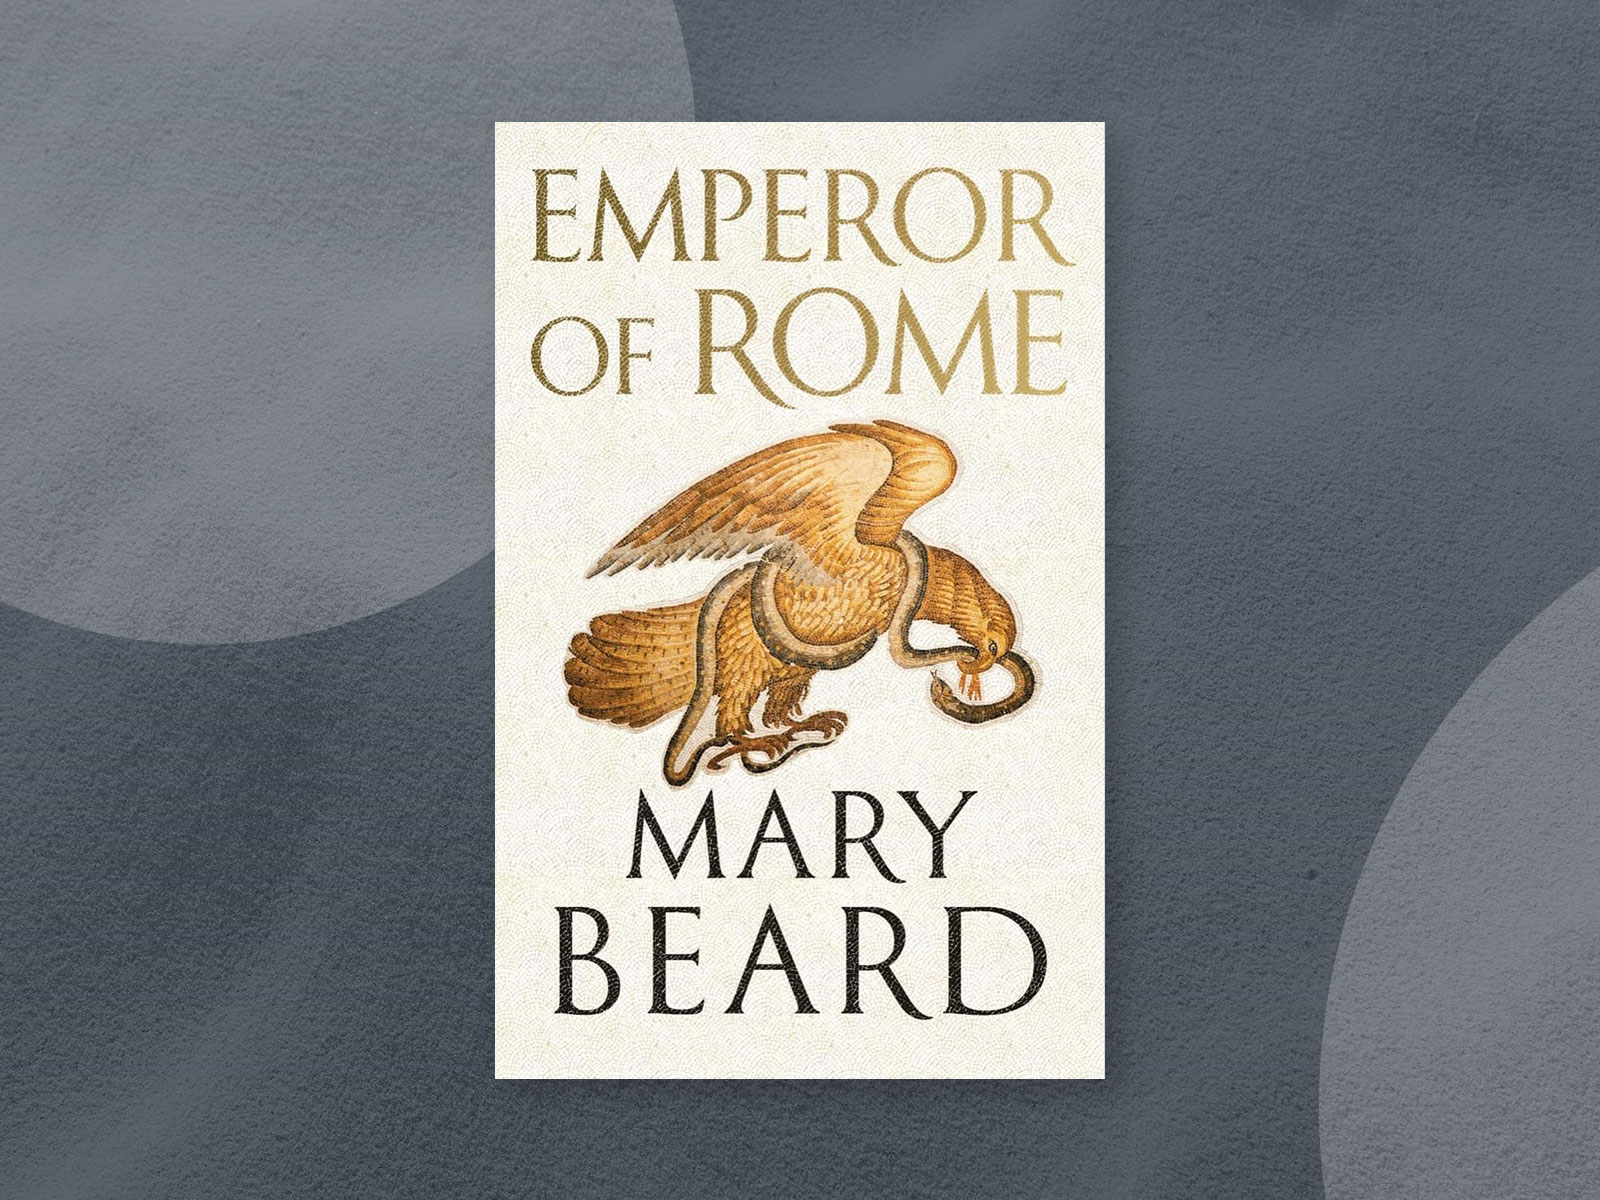 book jacket of “Emperor of Rome” by Mary Beard